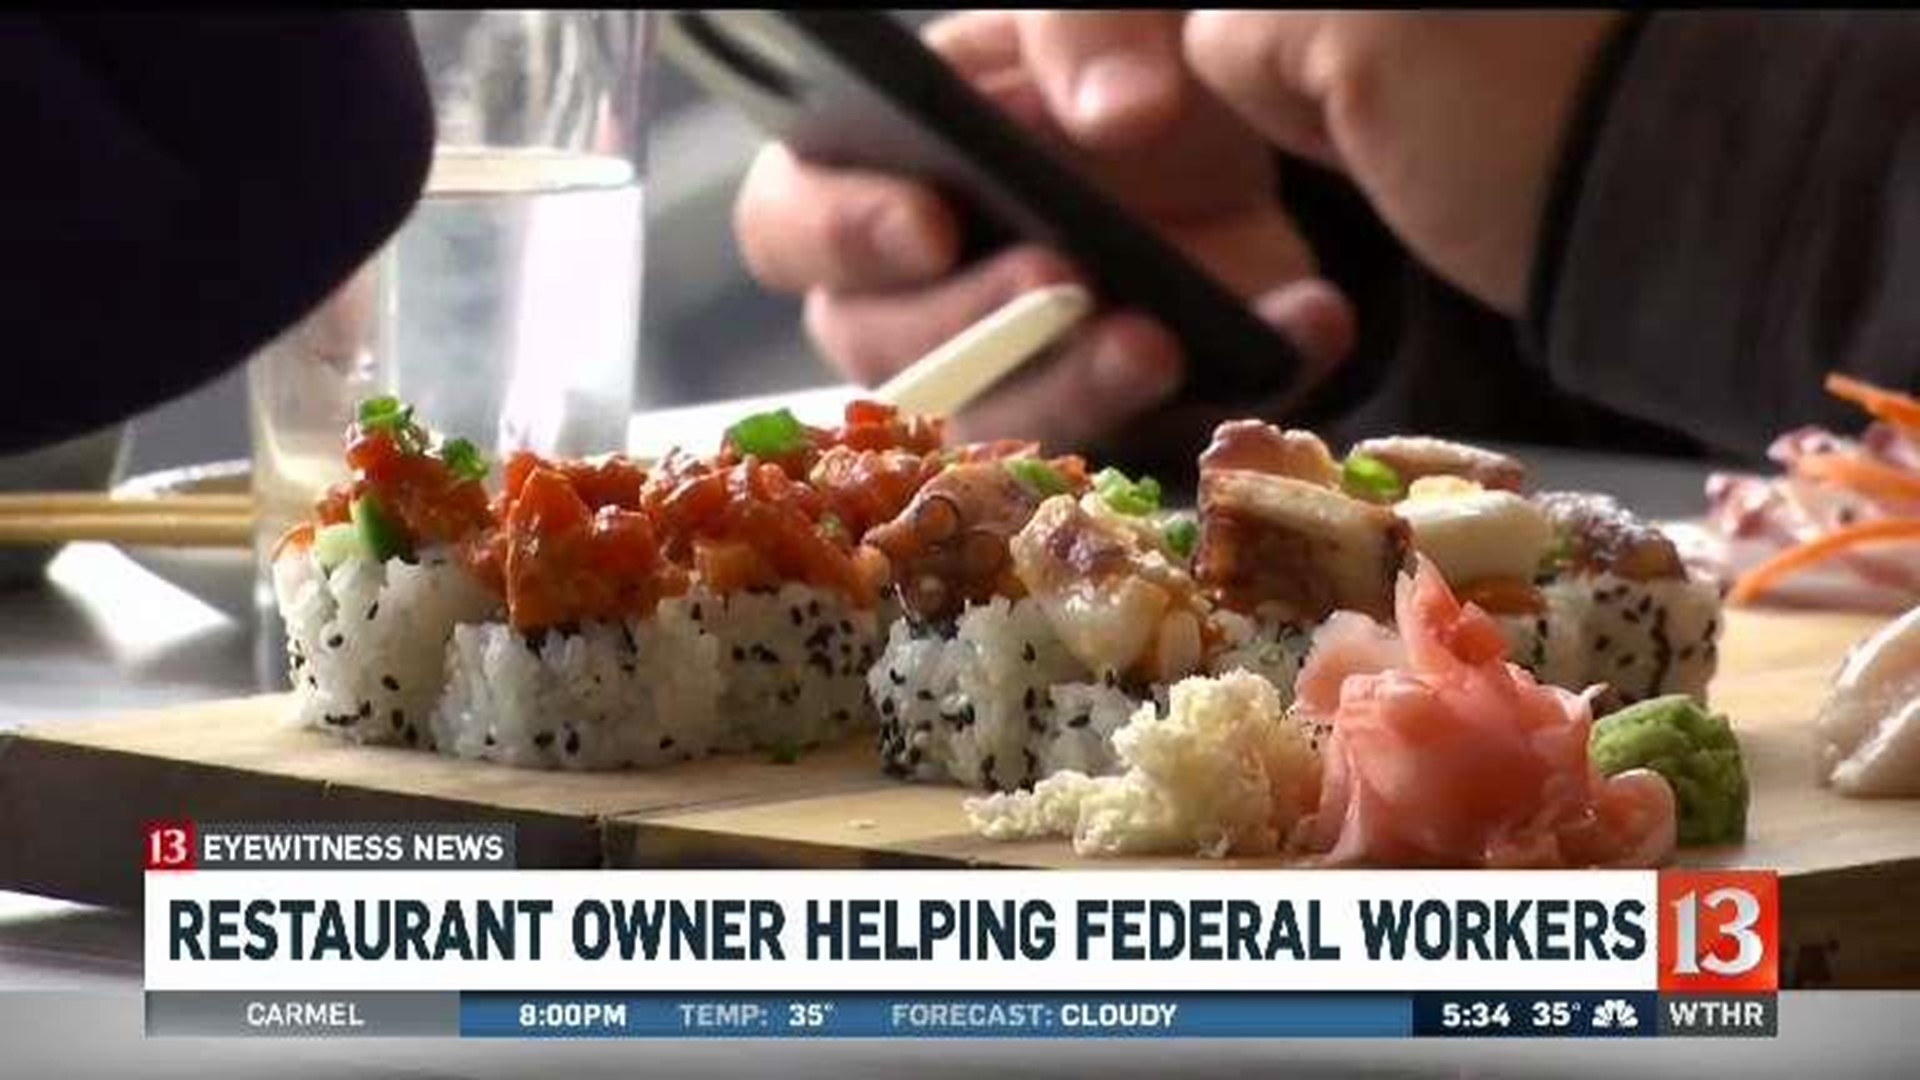 Restaurant owner helping federal workers